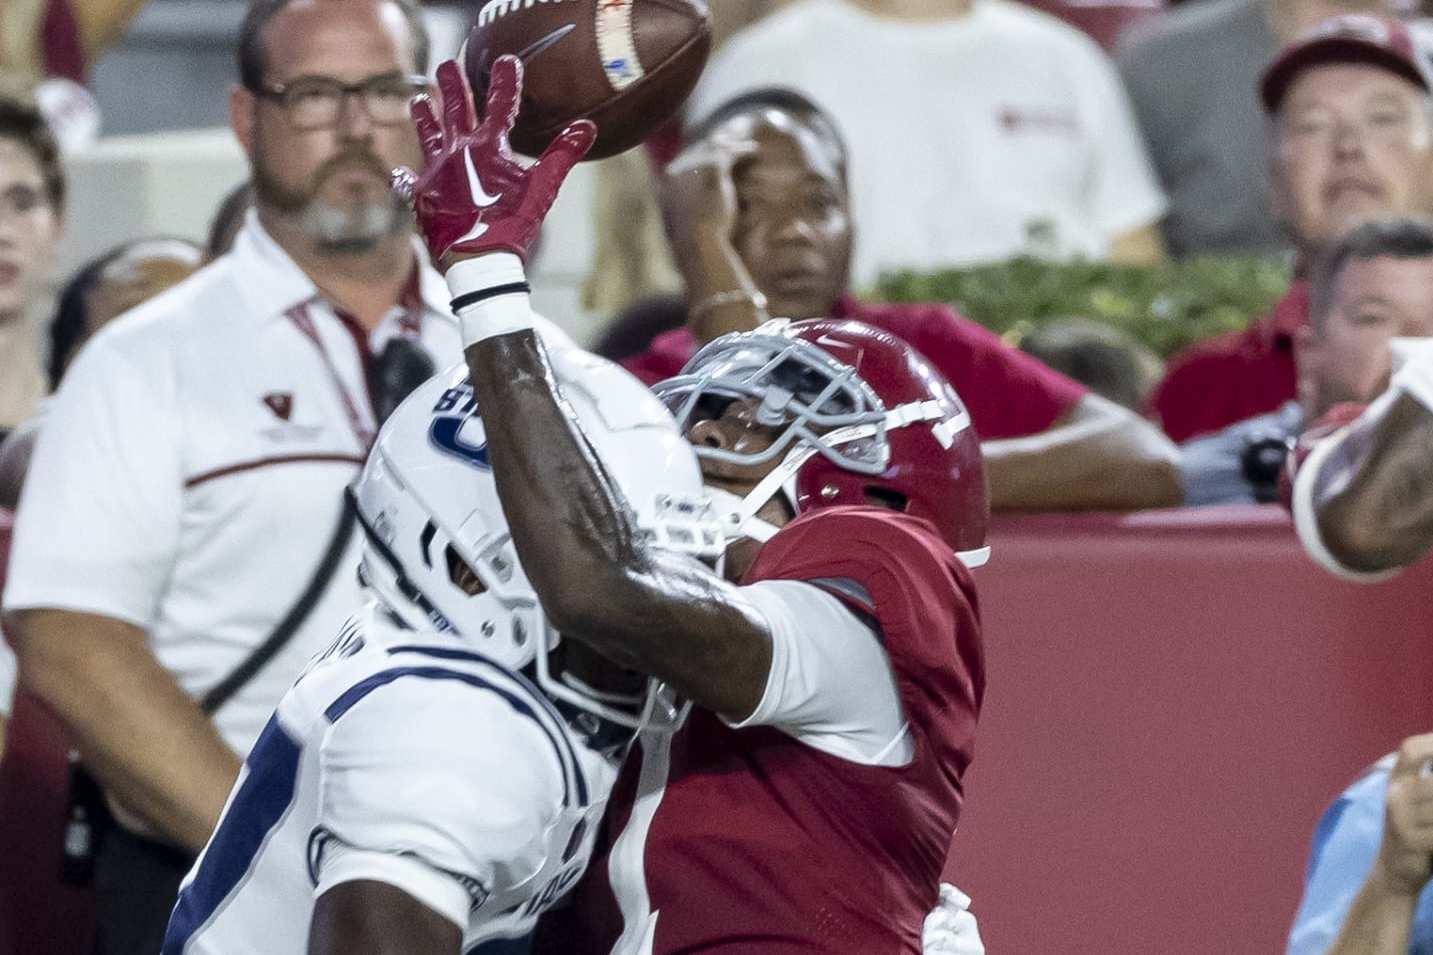 Nine SEC prospects picked up in first round of 2023 NFL Draft - ABC17NEWS